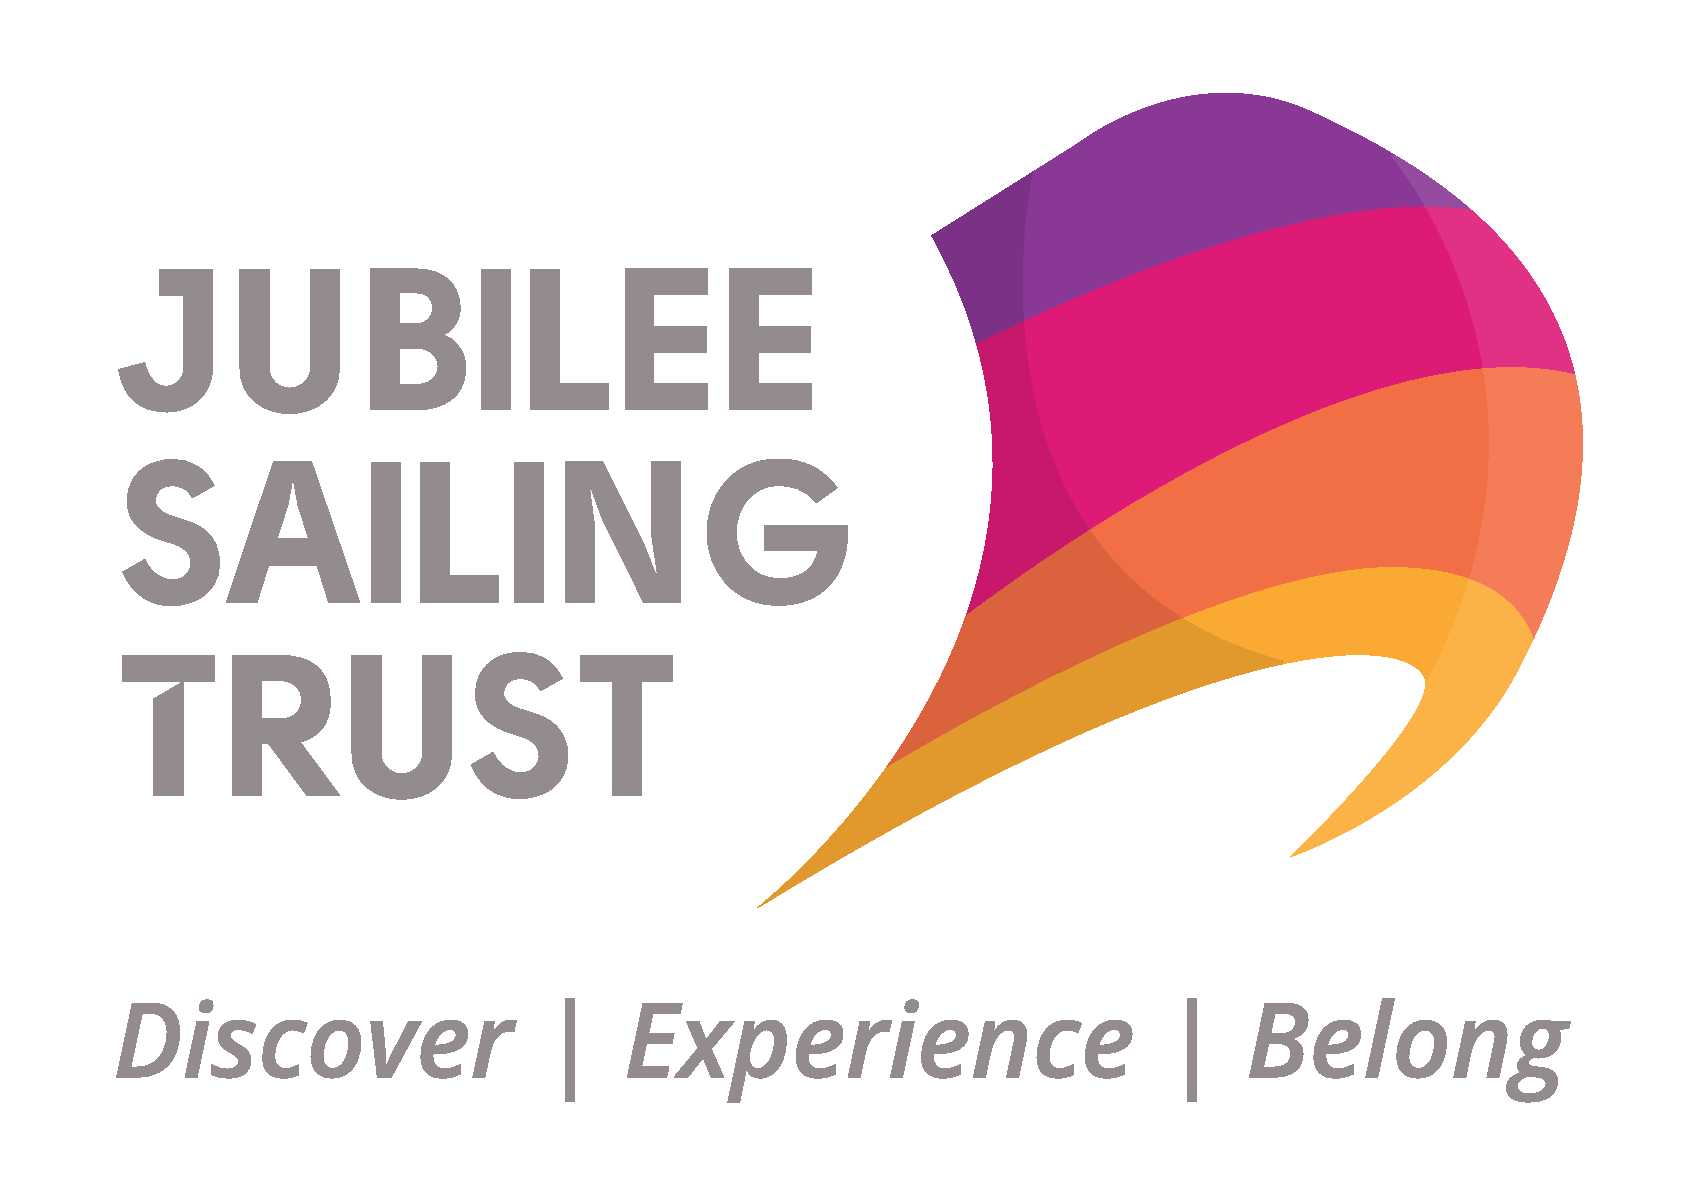 The logo for the Jubilee Sailing Trust Charity